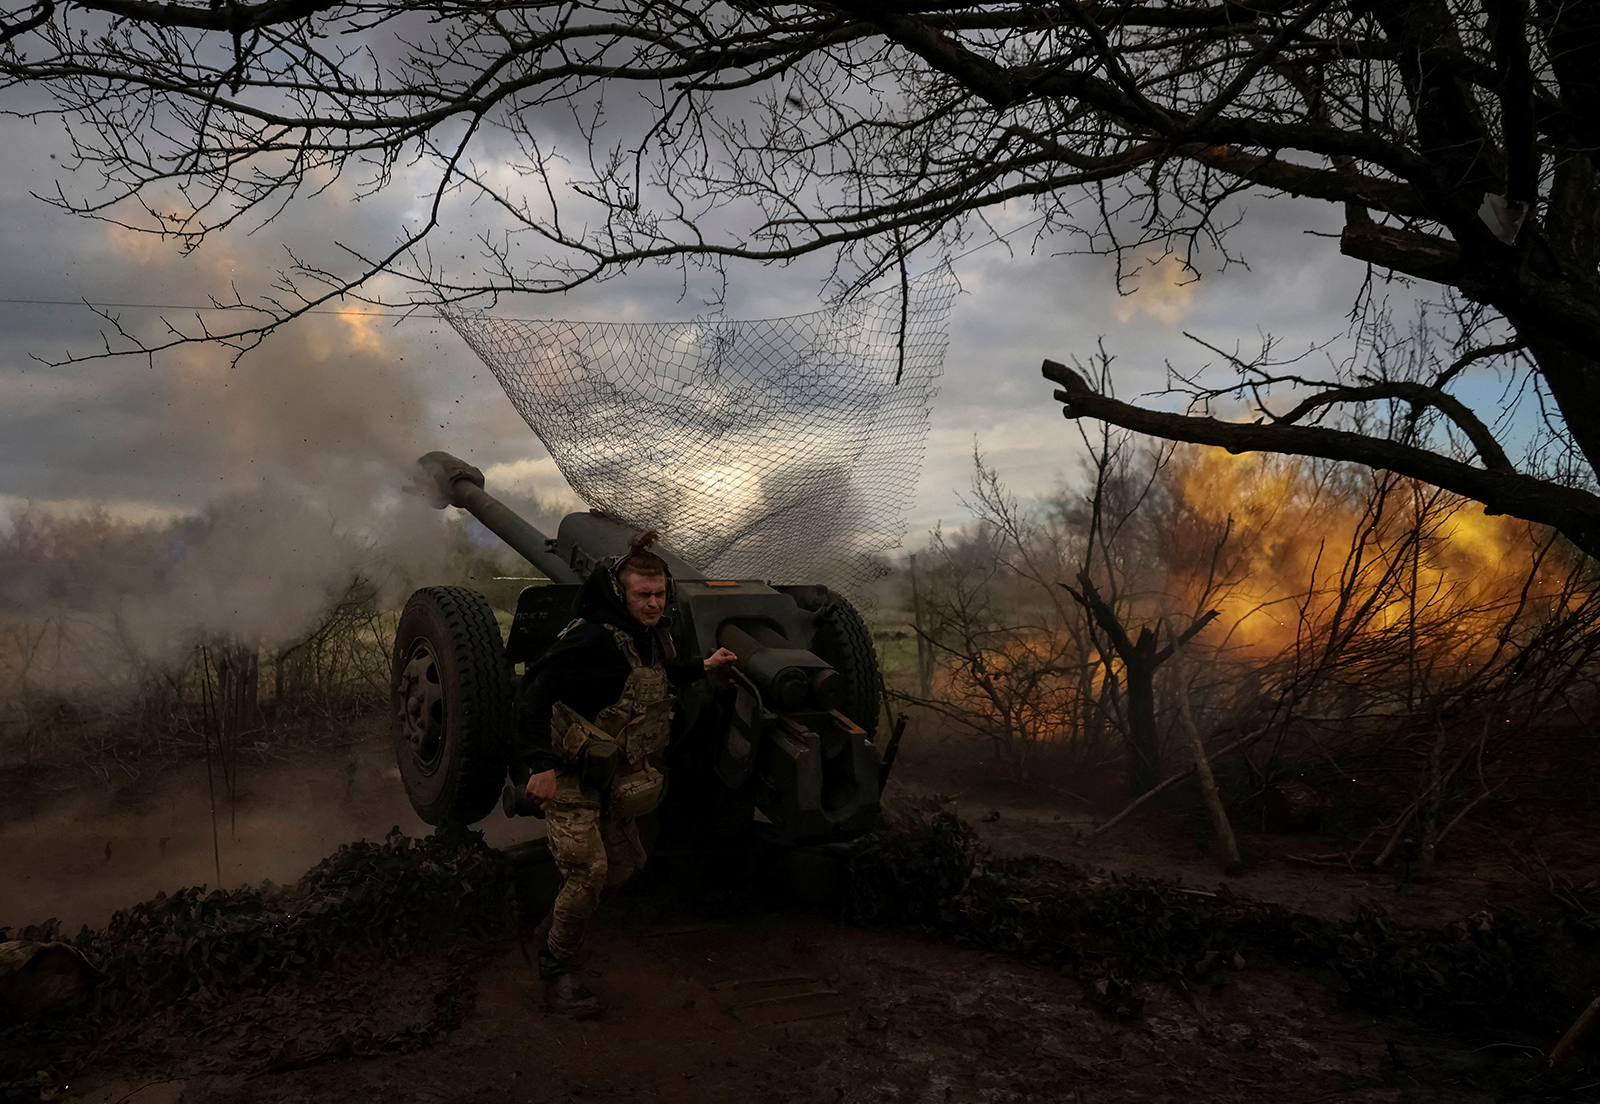 Ukrainian service members from a 3rd separate assault brigade of the Armed Forces of Ukraine, fire a howitzer D30 at a front line near the city of Bakhmut, Ukraine on April 23.